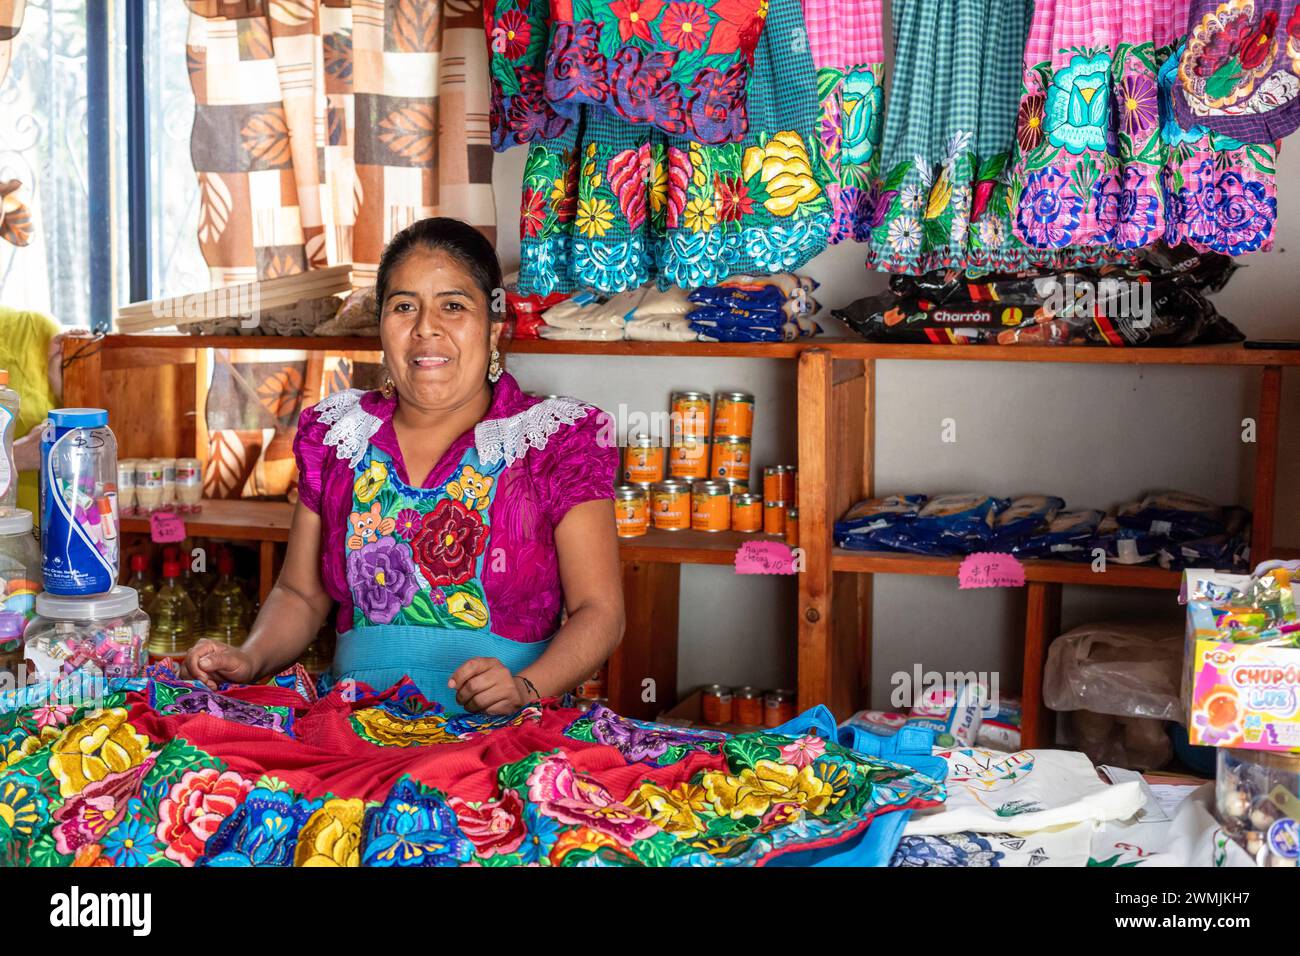 San Miguel del Valle, Oaxaca, Mexico - Epifania Hernandez Garcia makes elaborate aprons, worn by most women in this rural Mexican town. Different apro Stock Photo